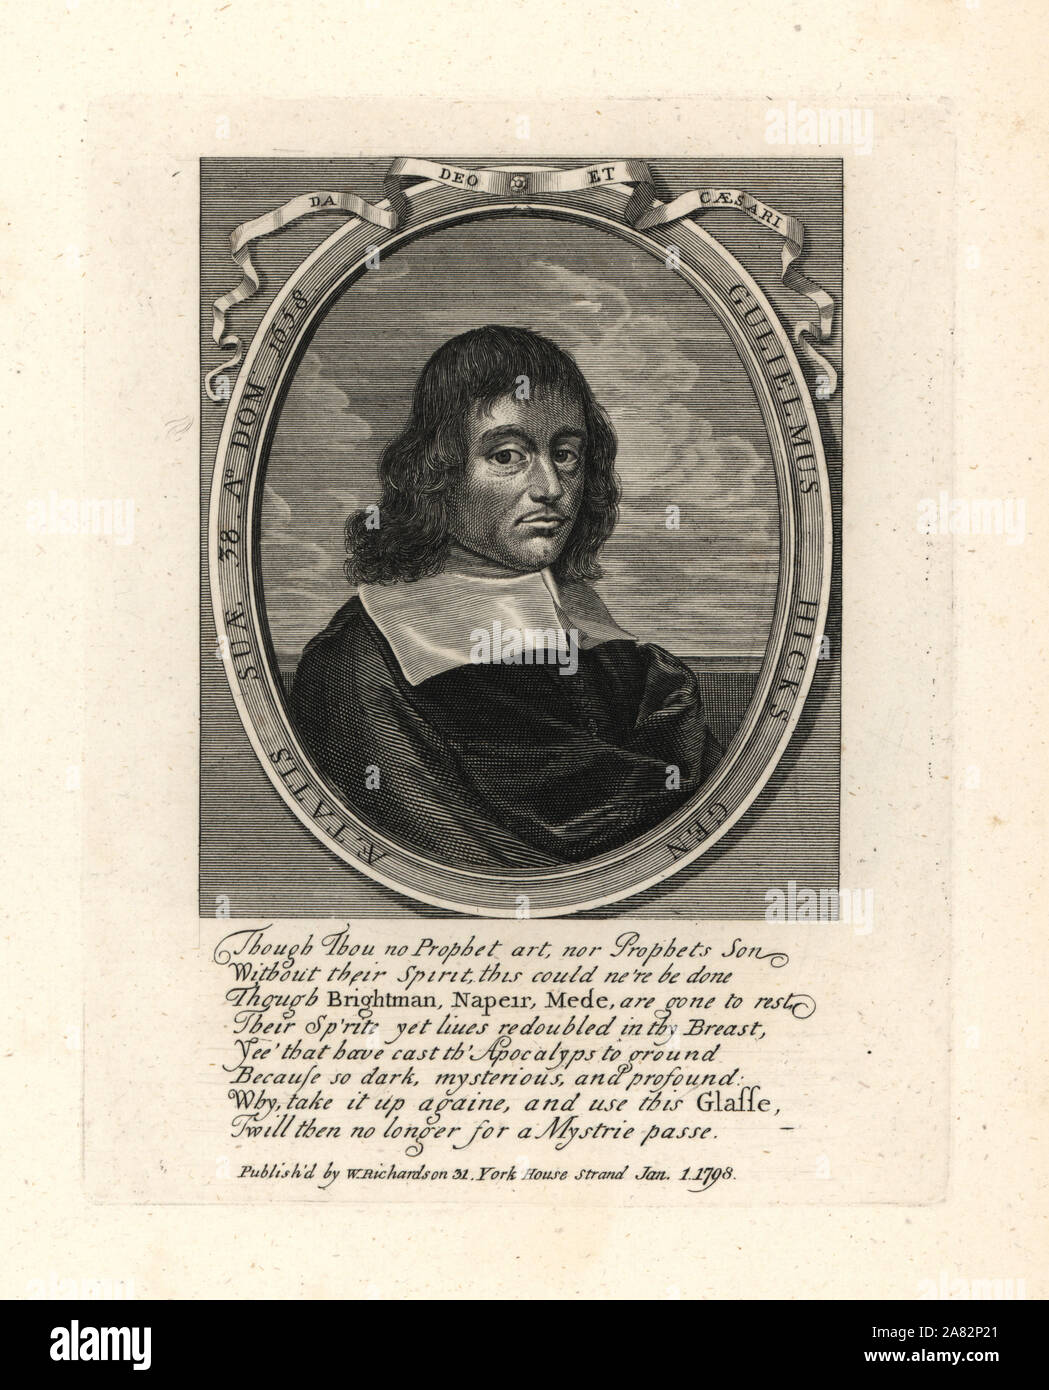 William Hicks, frontispiece to his The Revelation Revealed, Apokalypsis apokalypseos, 1658. Copperplate engraving from William Richardson's Portraits Illustrating Granger's Biographical History of England, London, 1792–1812. James Granger (1723–1776) was an English clergyman, biographer, and print collector. Stock Photo